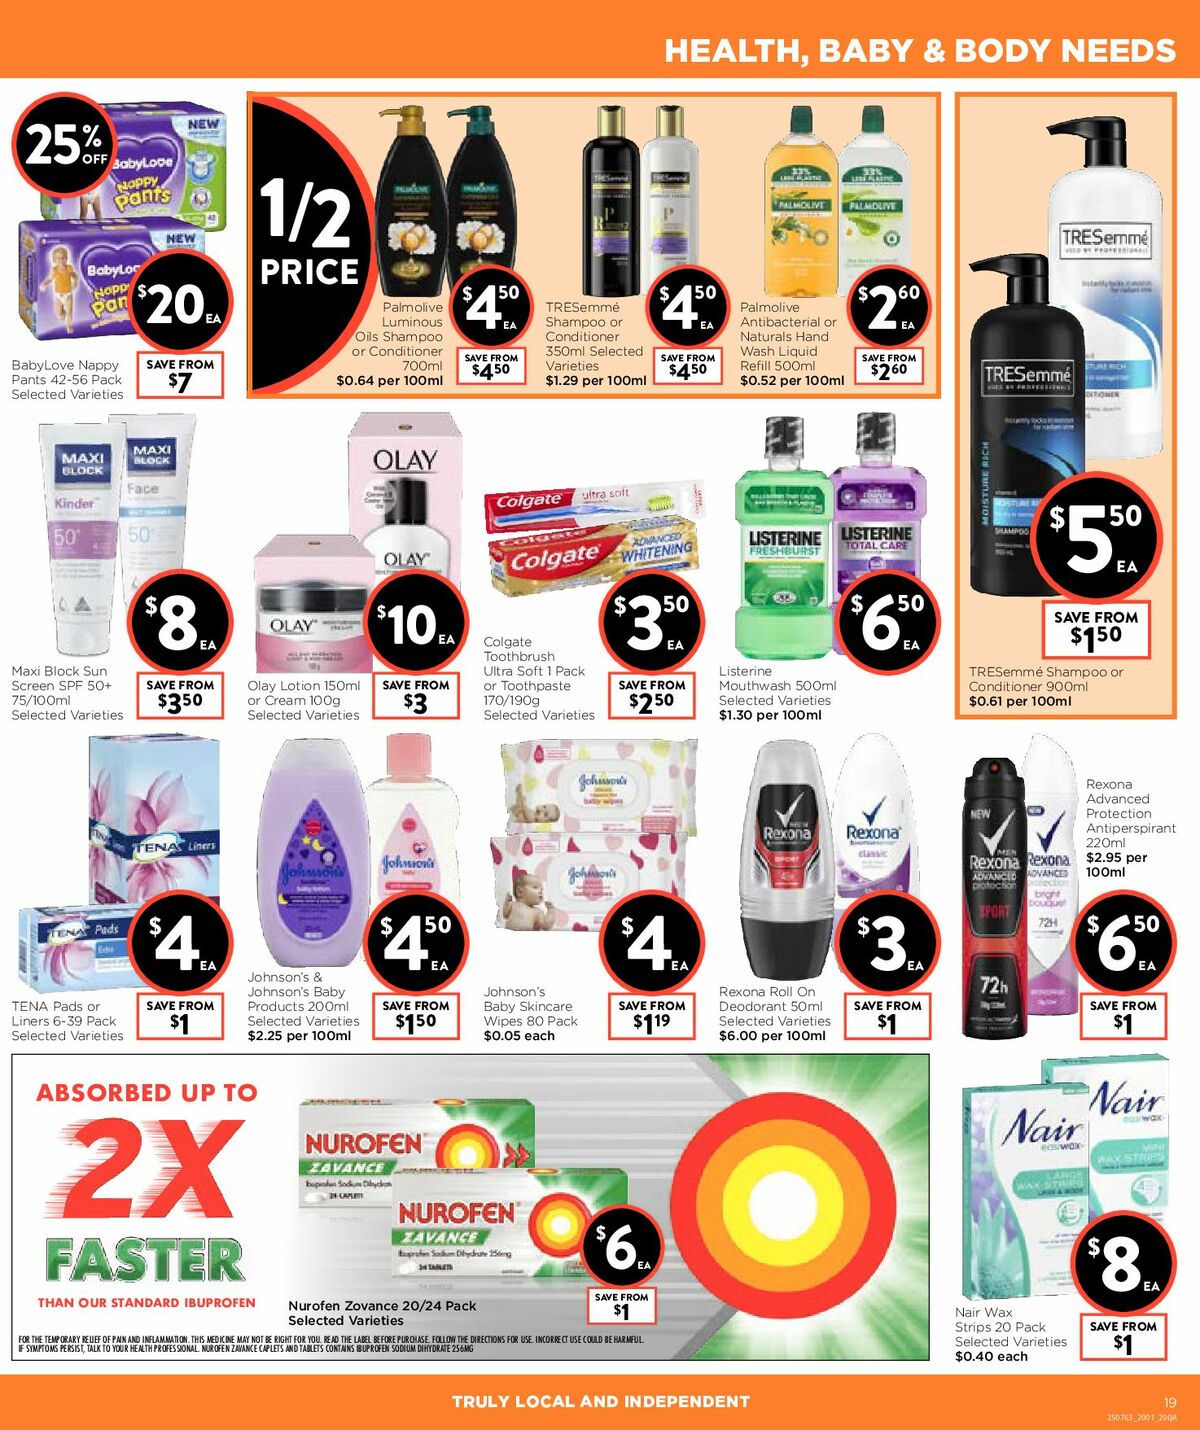 FoodWorks Supermarket Catalogues from 20 January